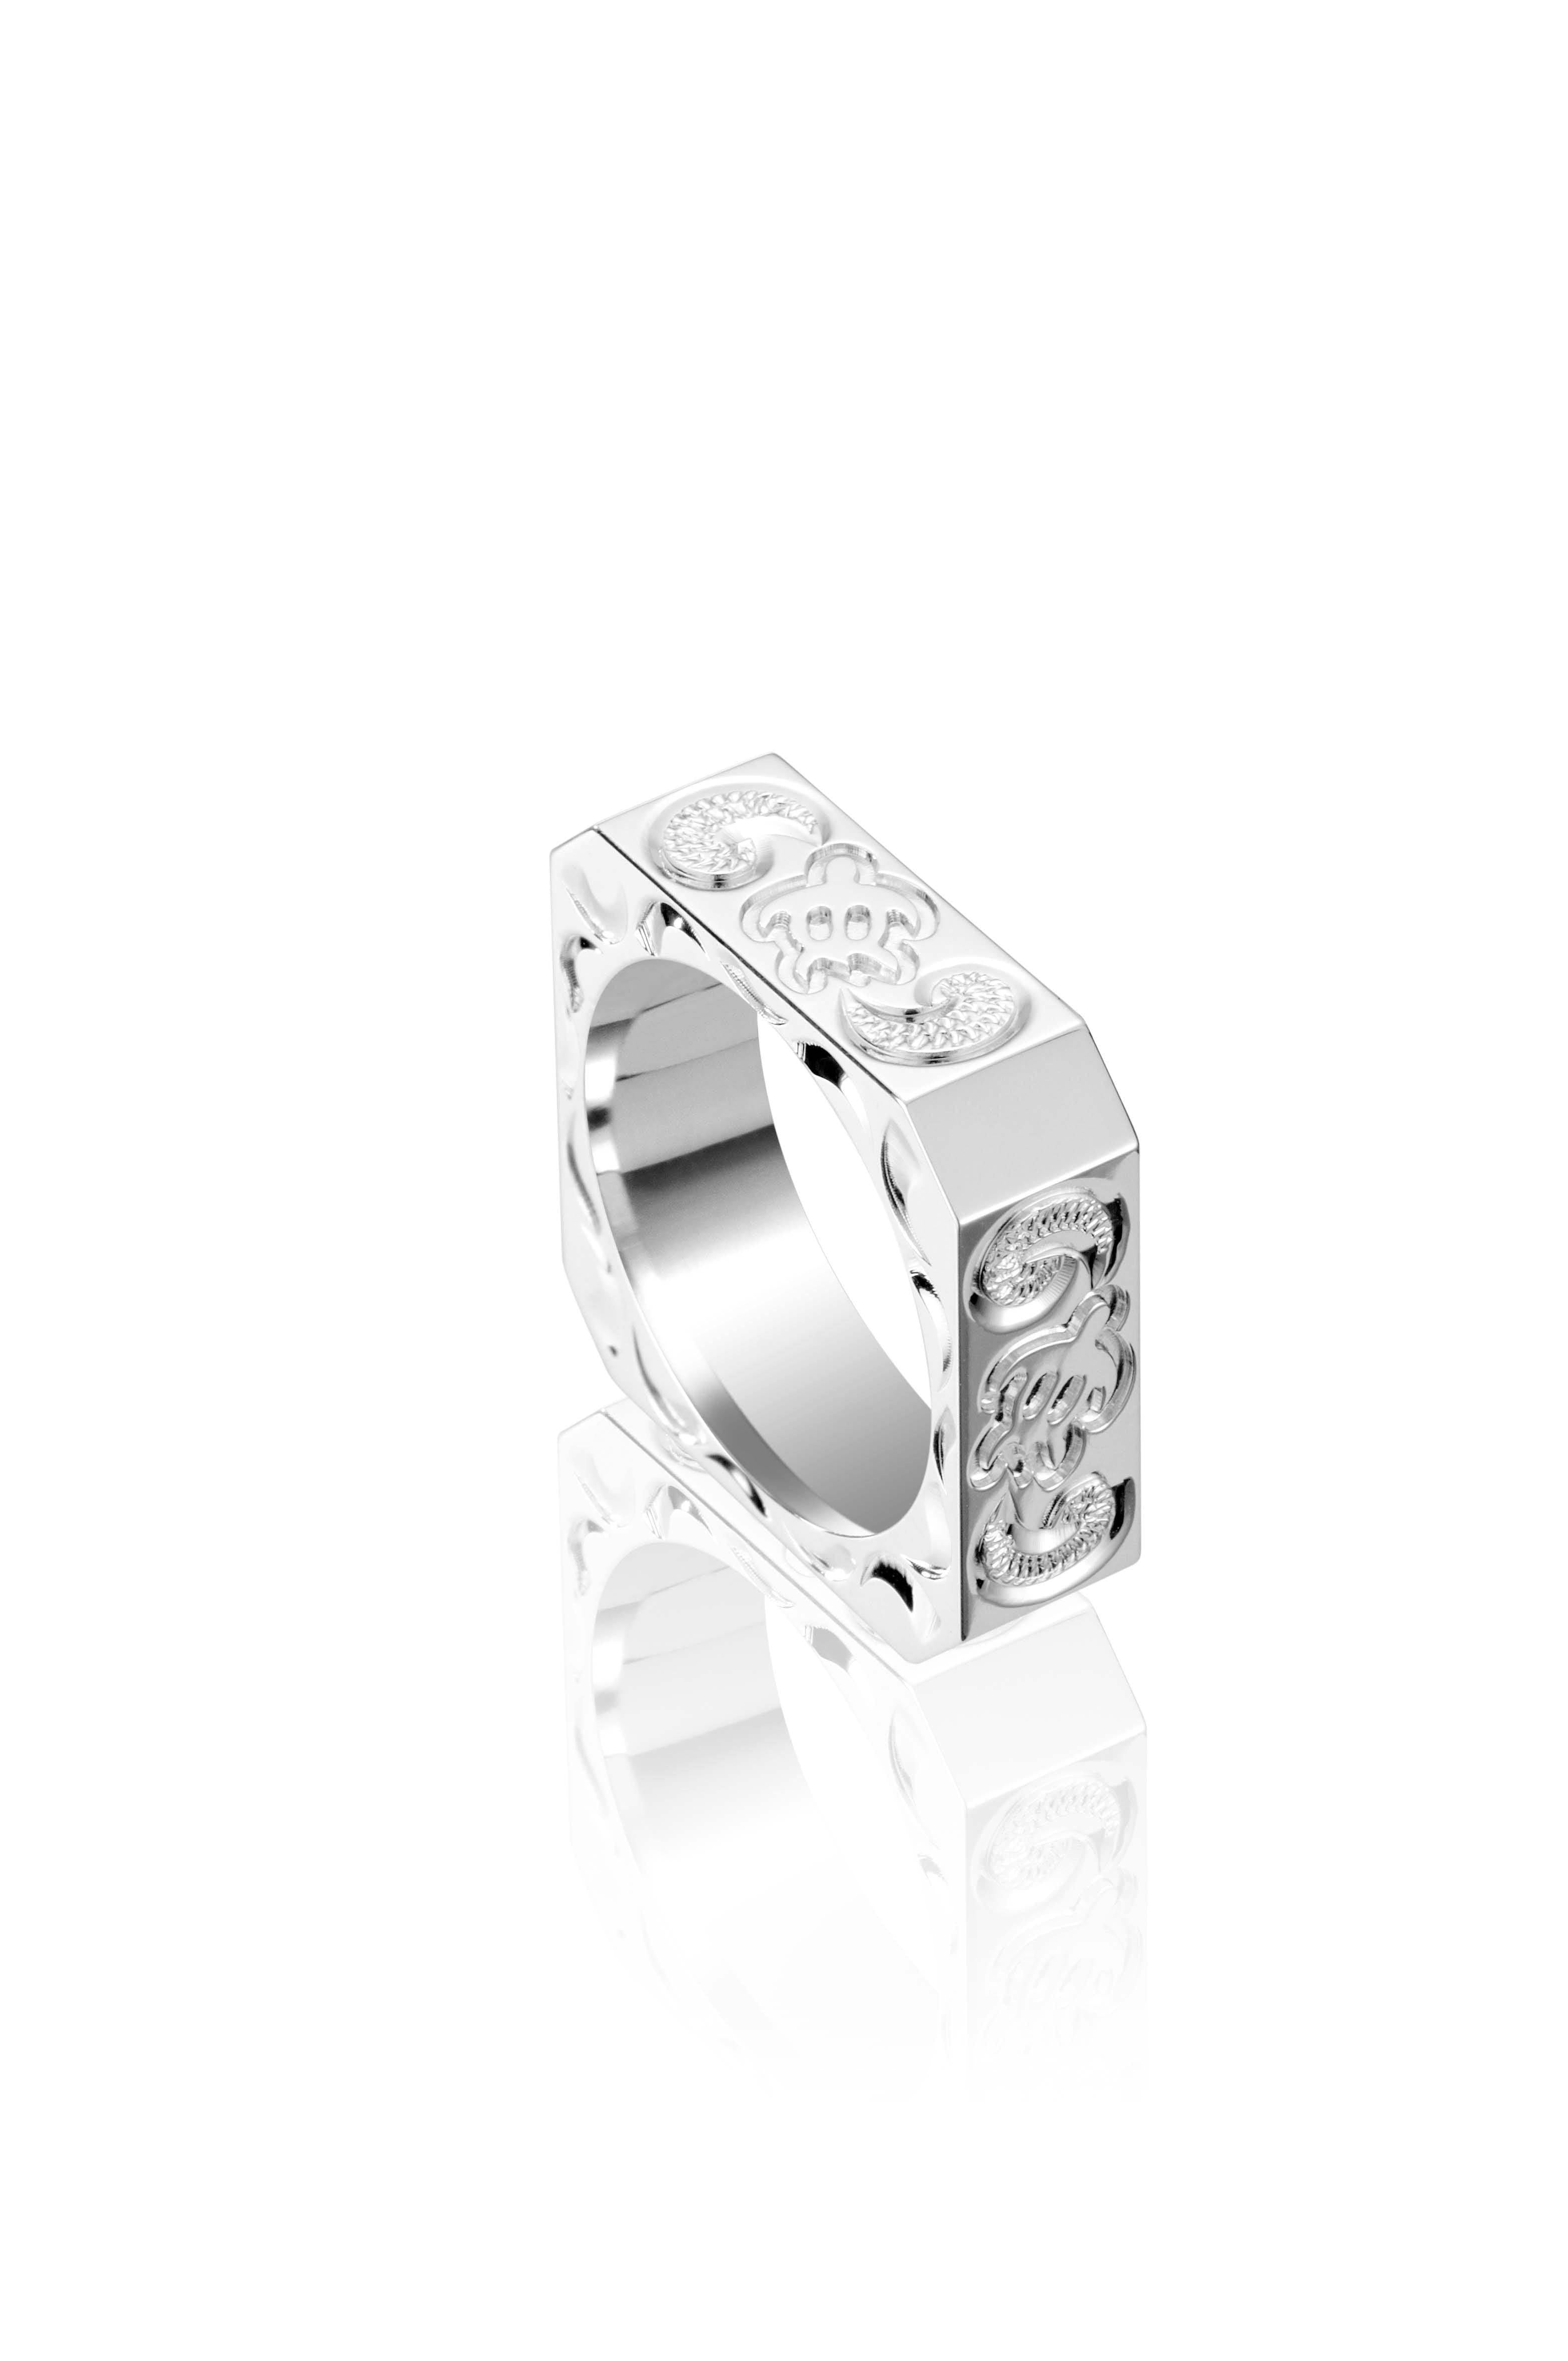 The picture shows a 925 sterling silver squared 8mm ring with hand engravings including a sea turtle.